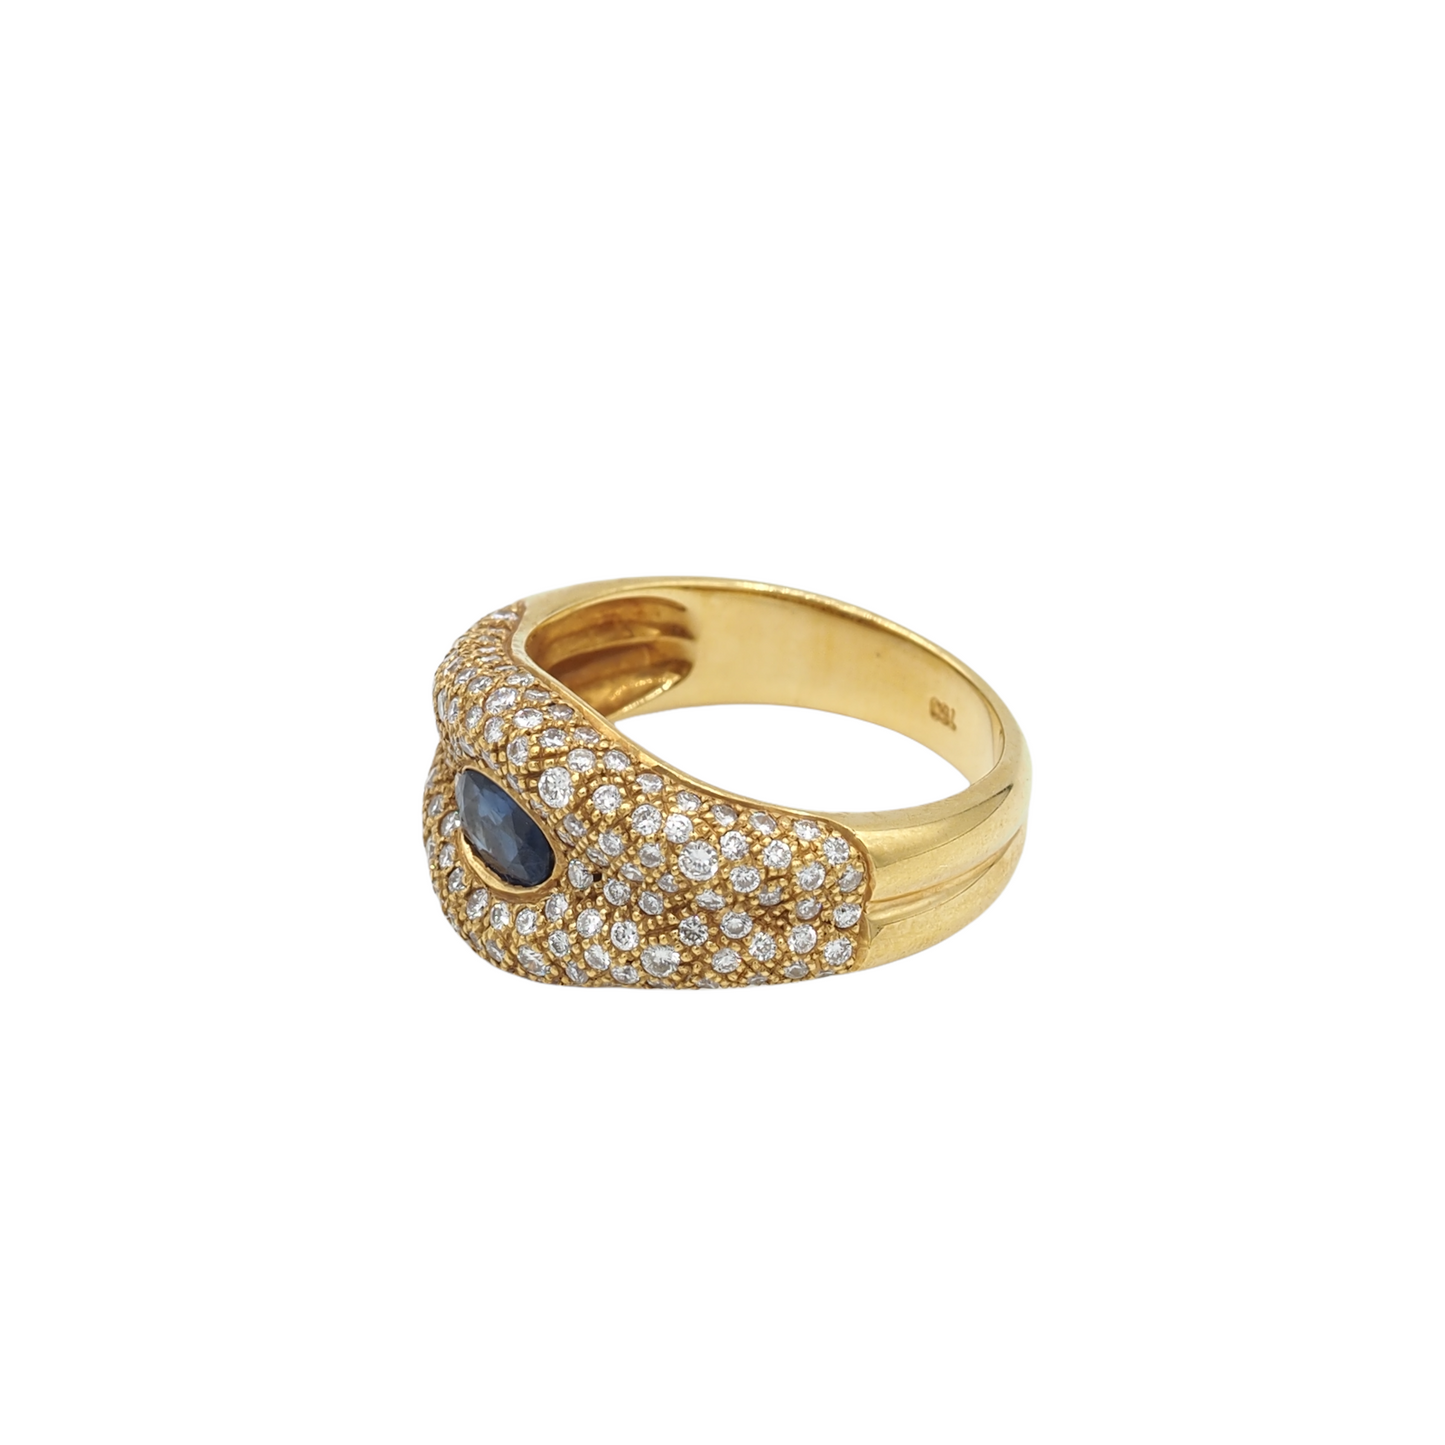 Oval sapphire ring - La Trouvaille